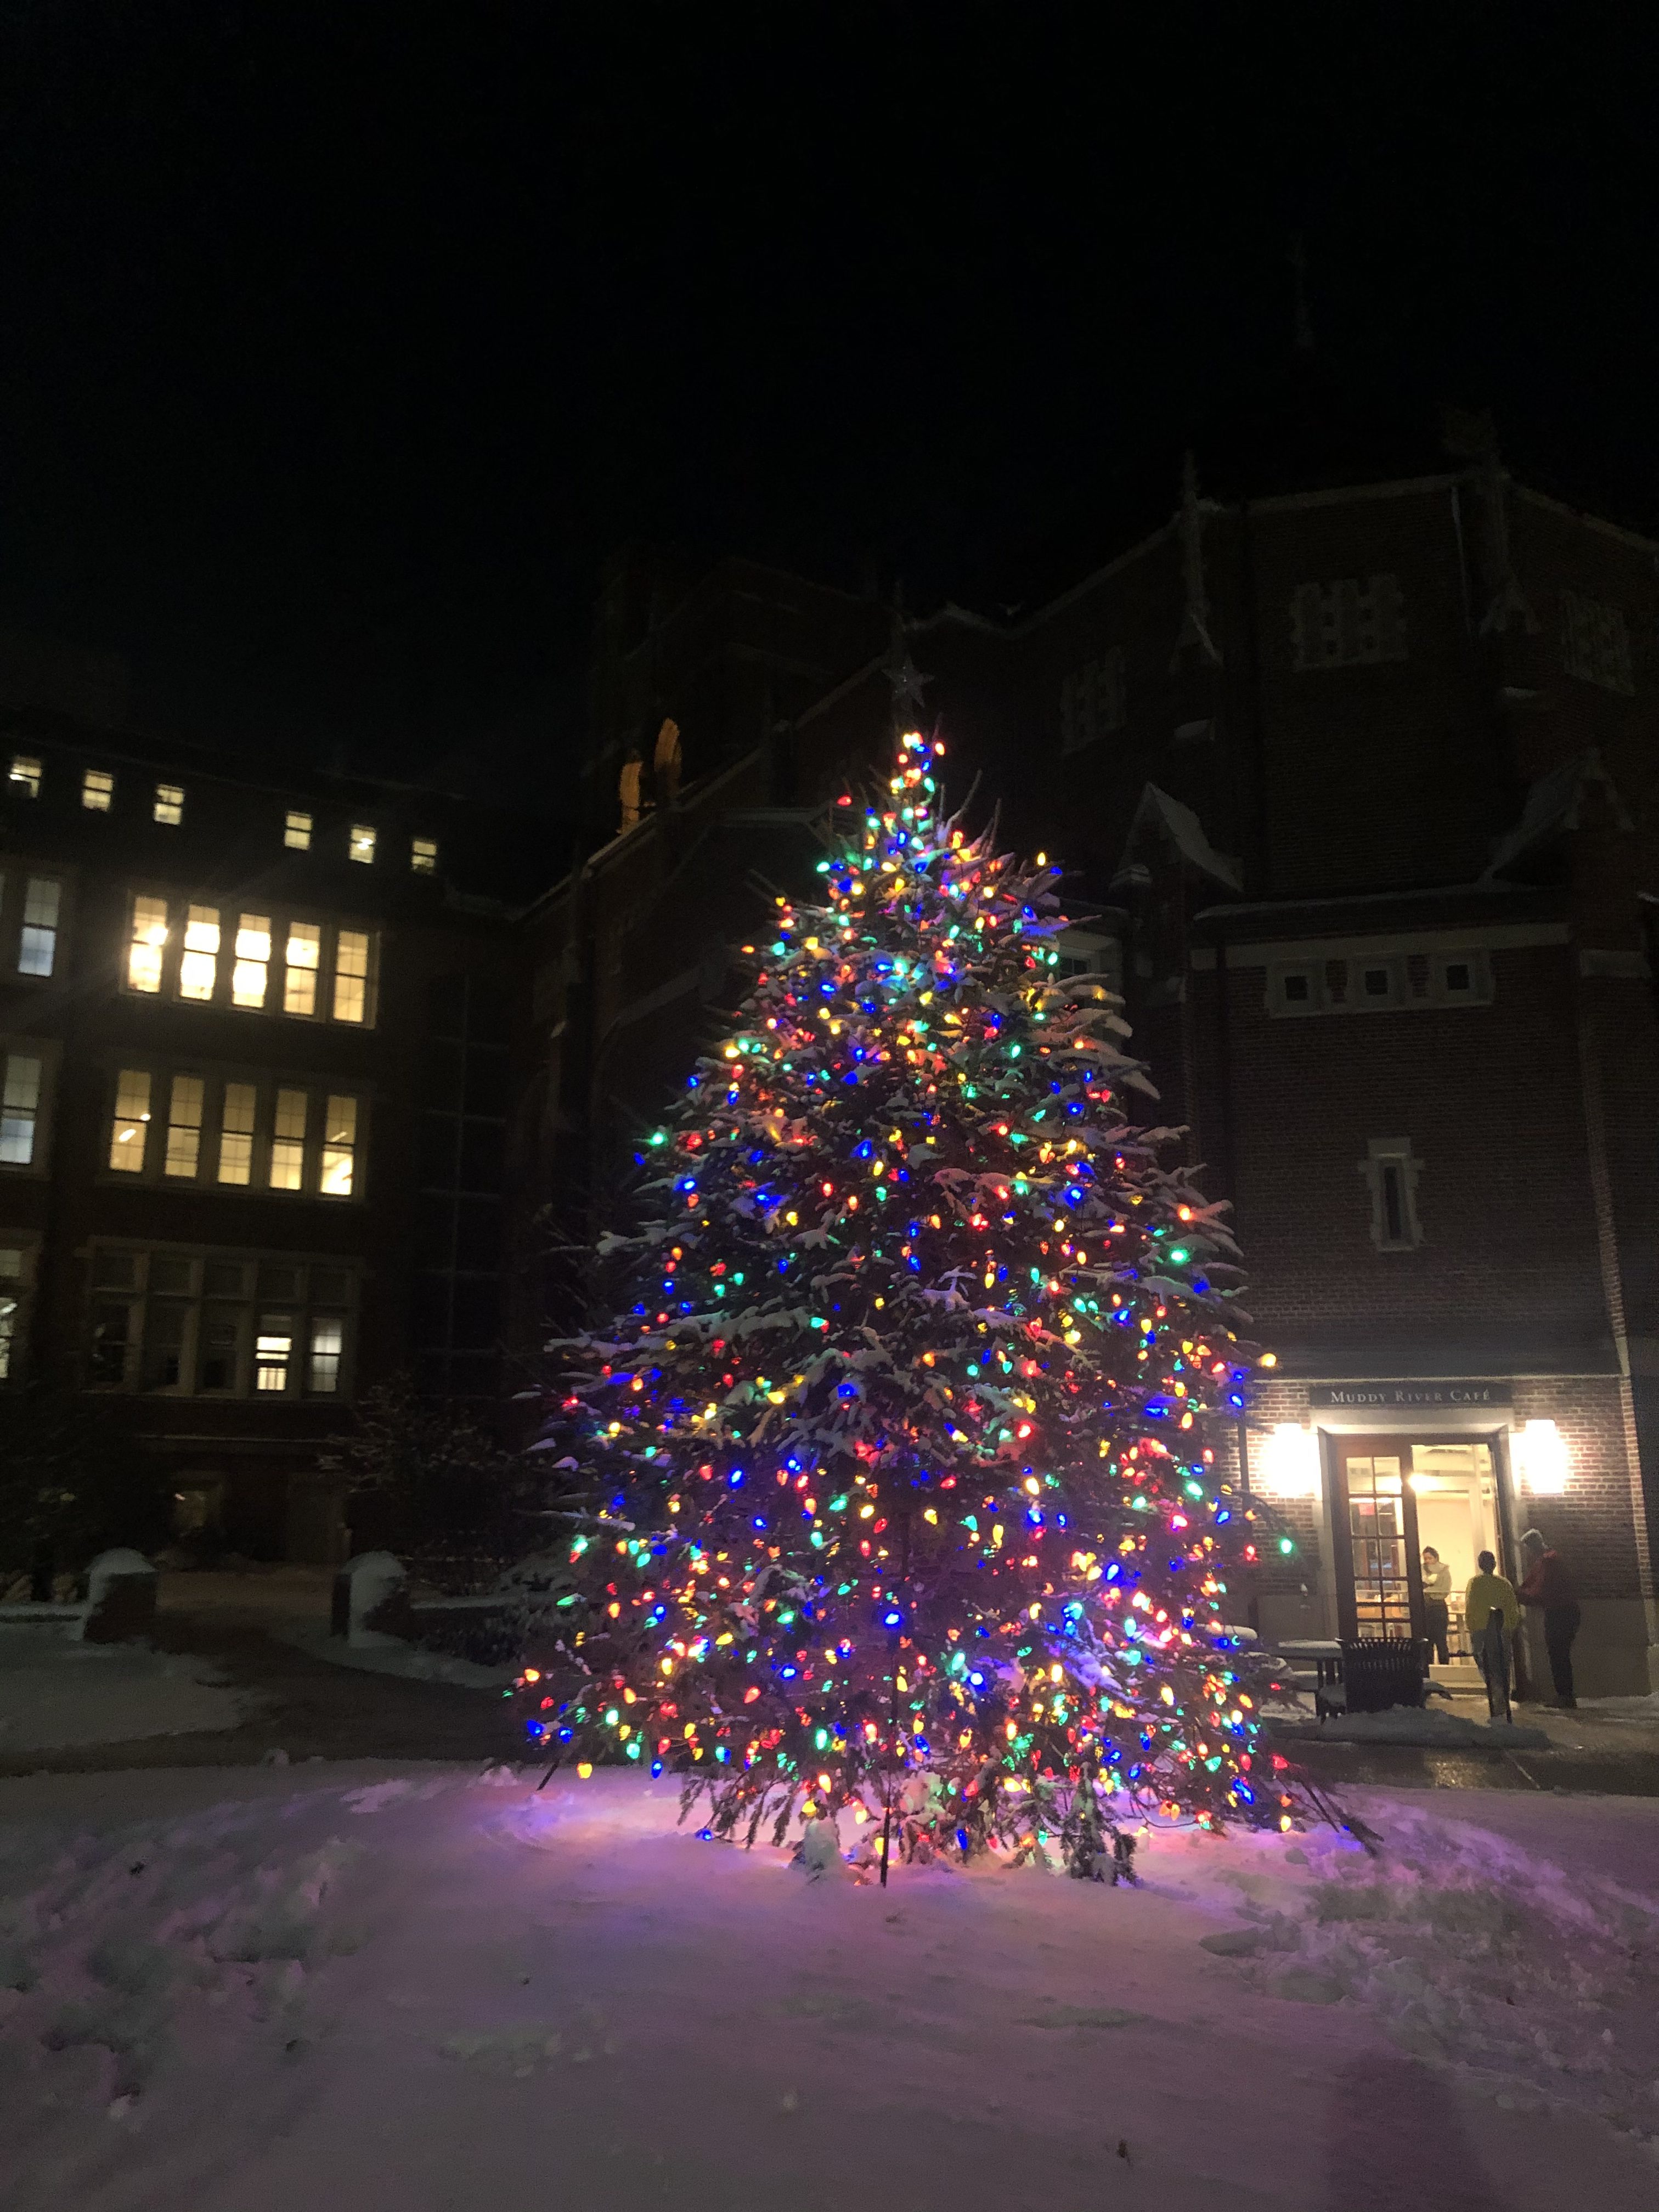 the Christmas tree on Emmanuel's campus